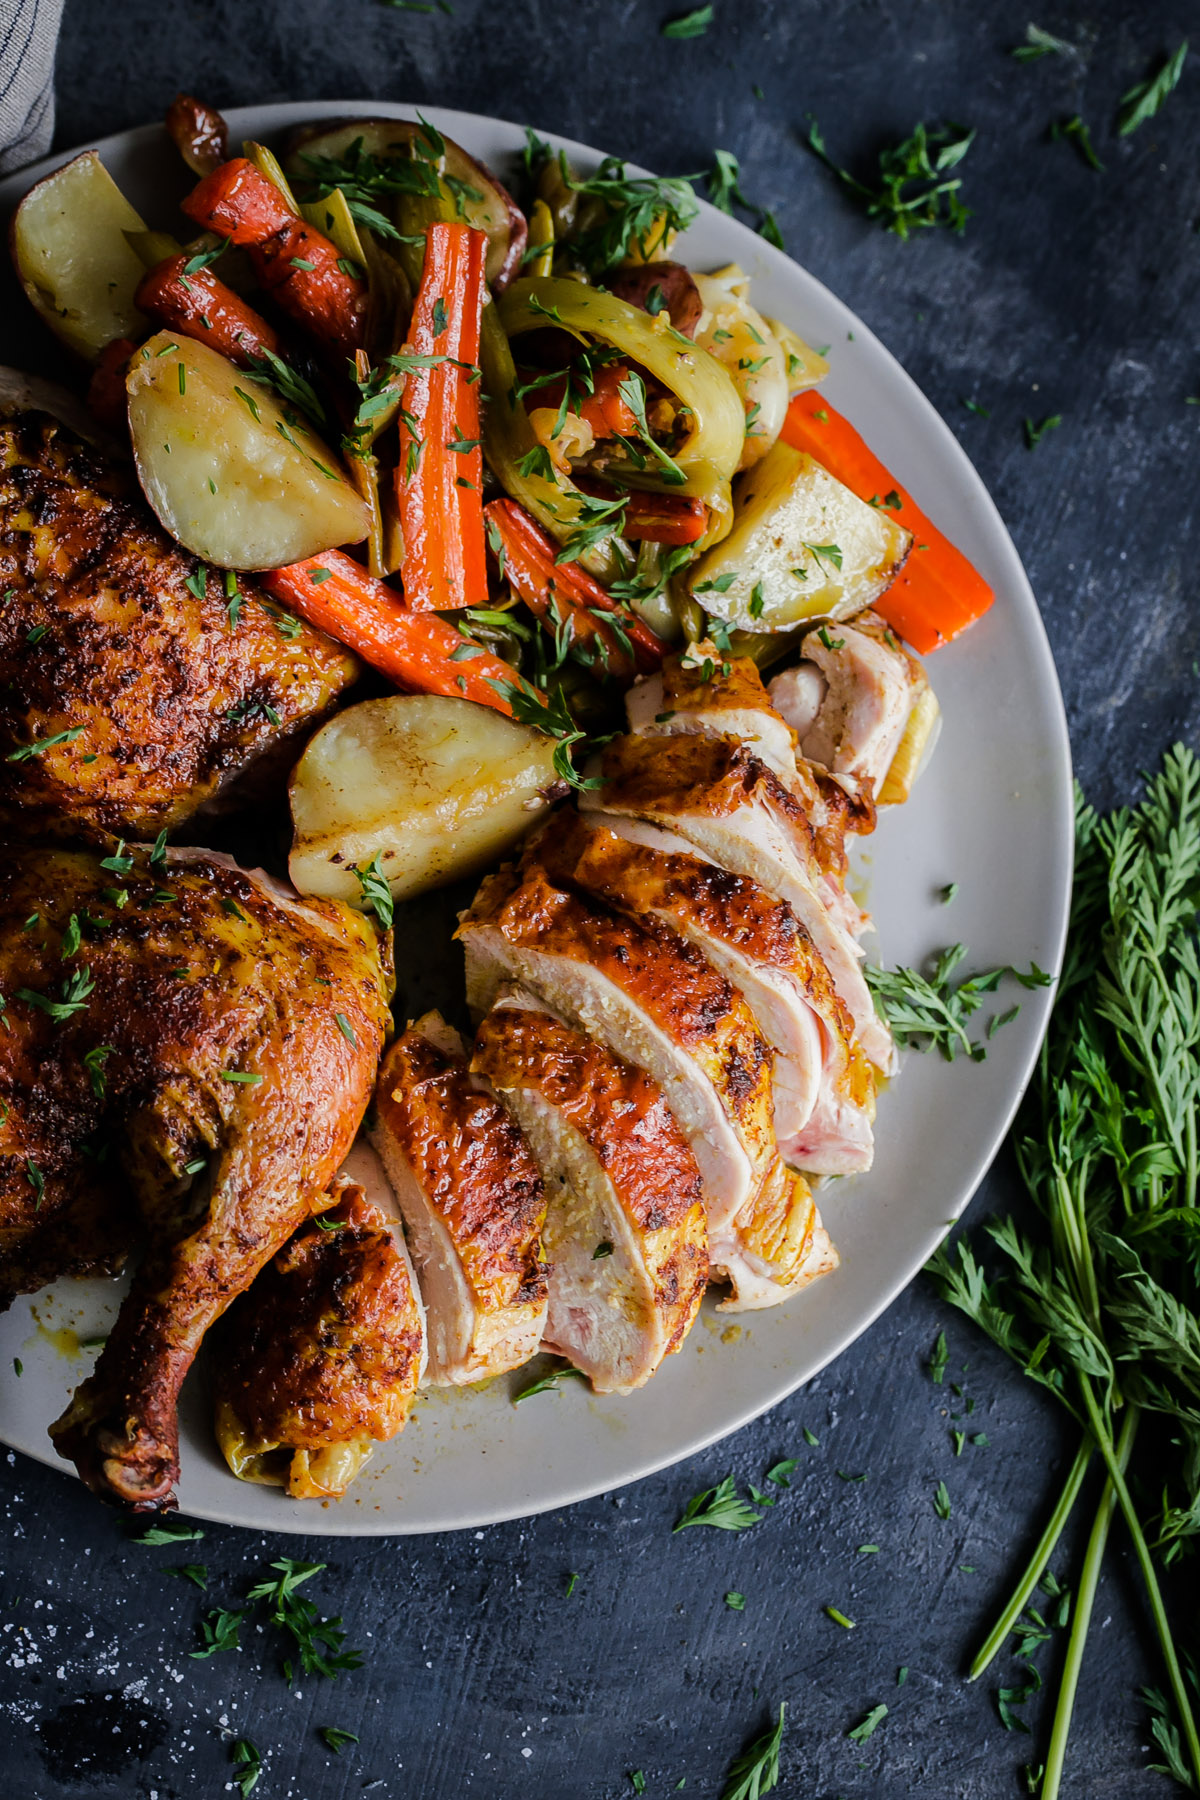 https://www.abeautifulplate.com/wp-content/uploads/2016/04/middle-eastern-spatchcocked-roast-chicken-and-vegetables-1-5.jpg